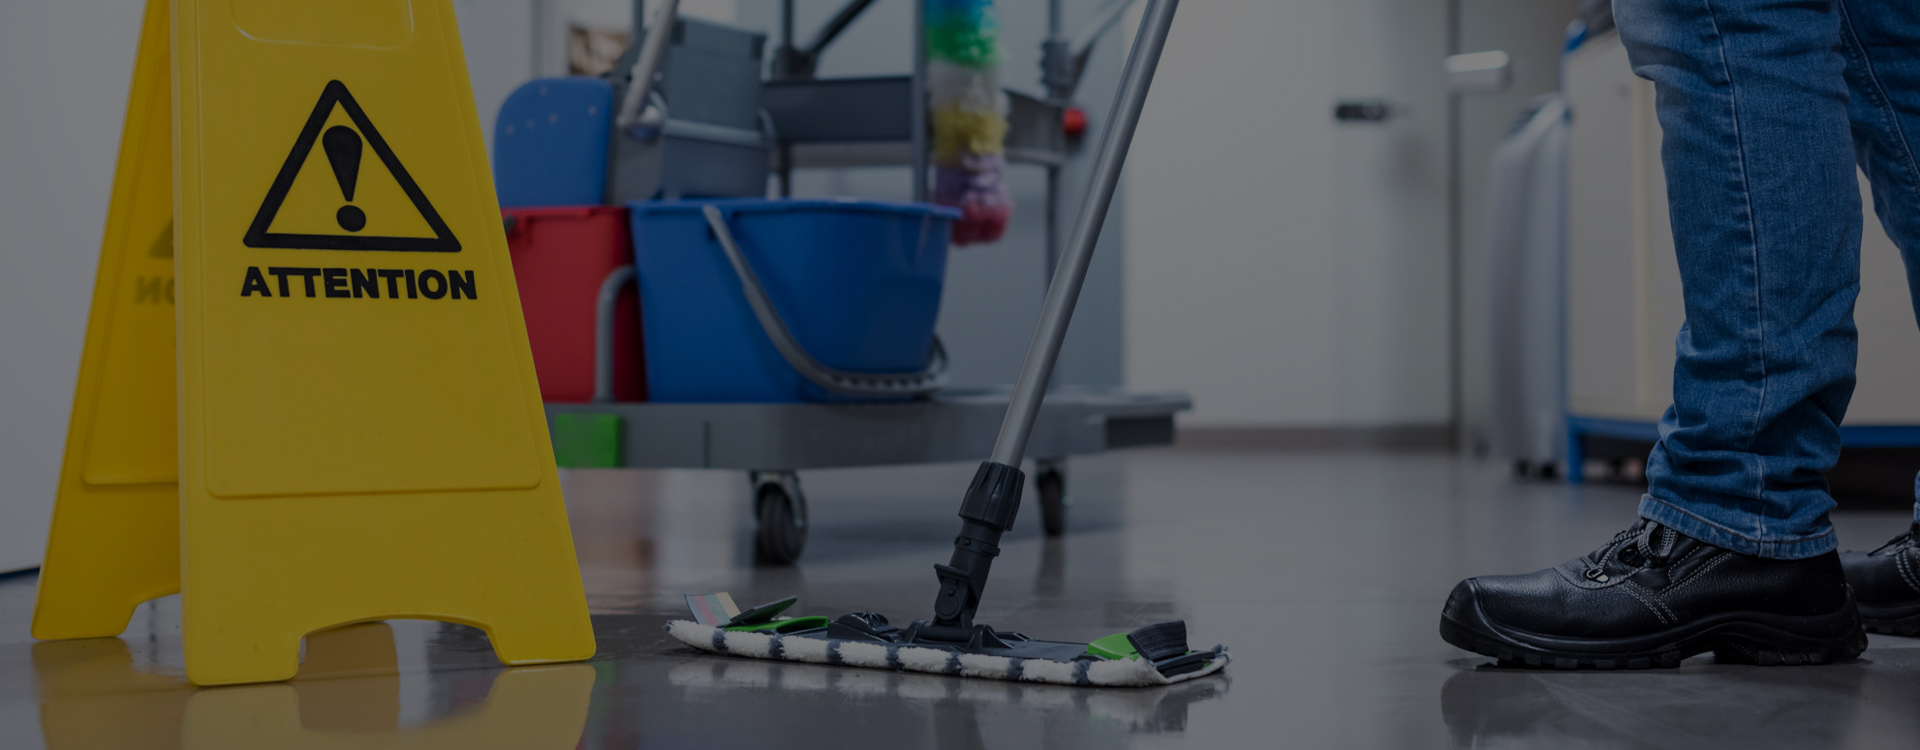 Commercial Cleaning Services Melbourne | Commercial Cleaners Near Me